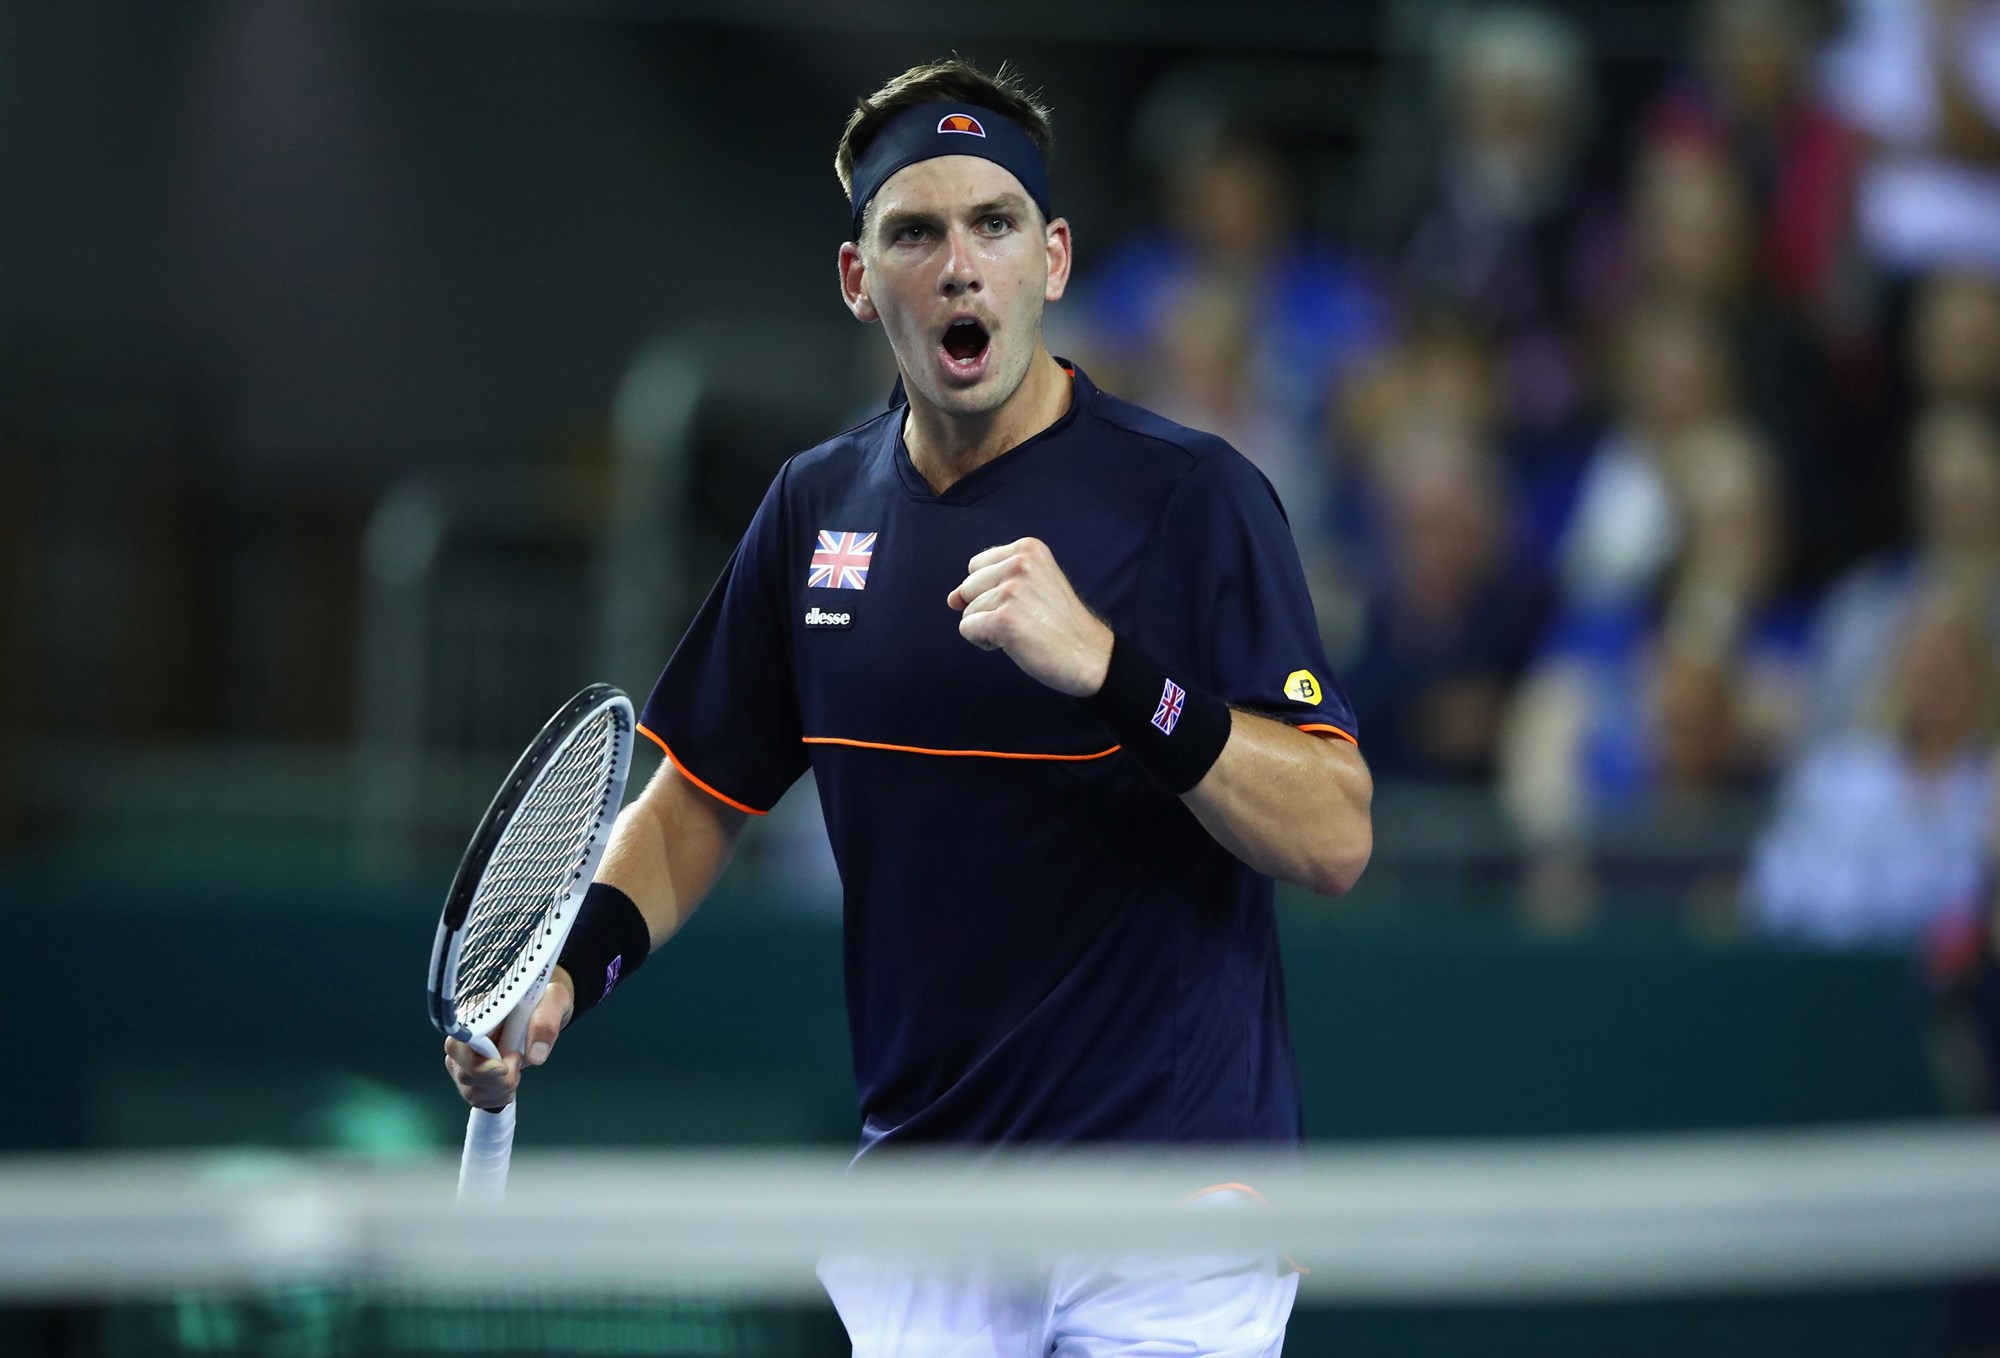 Cam Norrie fist pump after beating Sanjar Fayziev at the Davis Cup play-offs in 2018